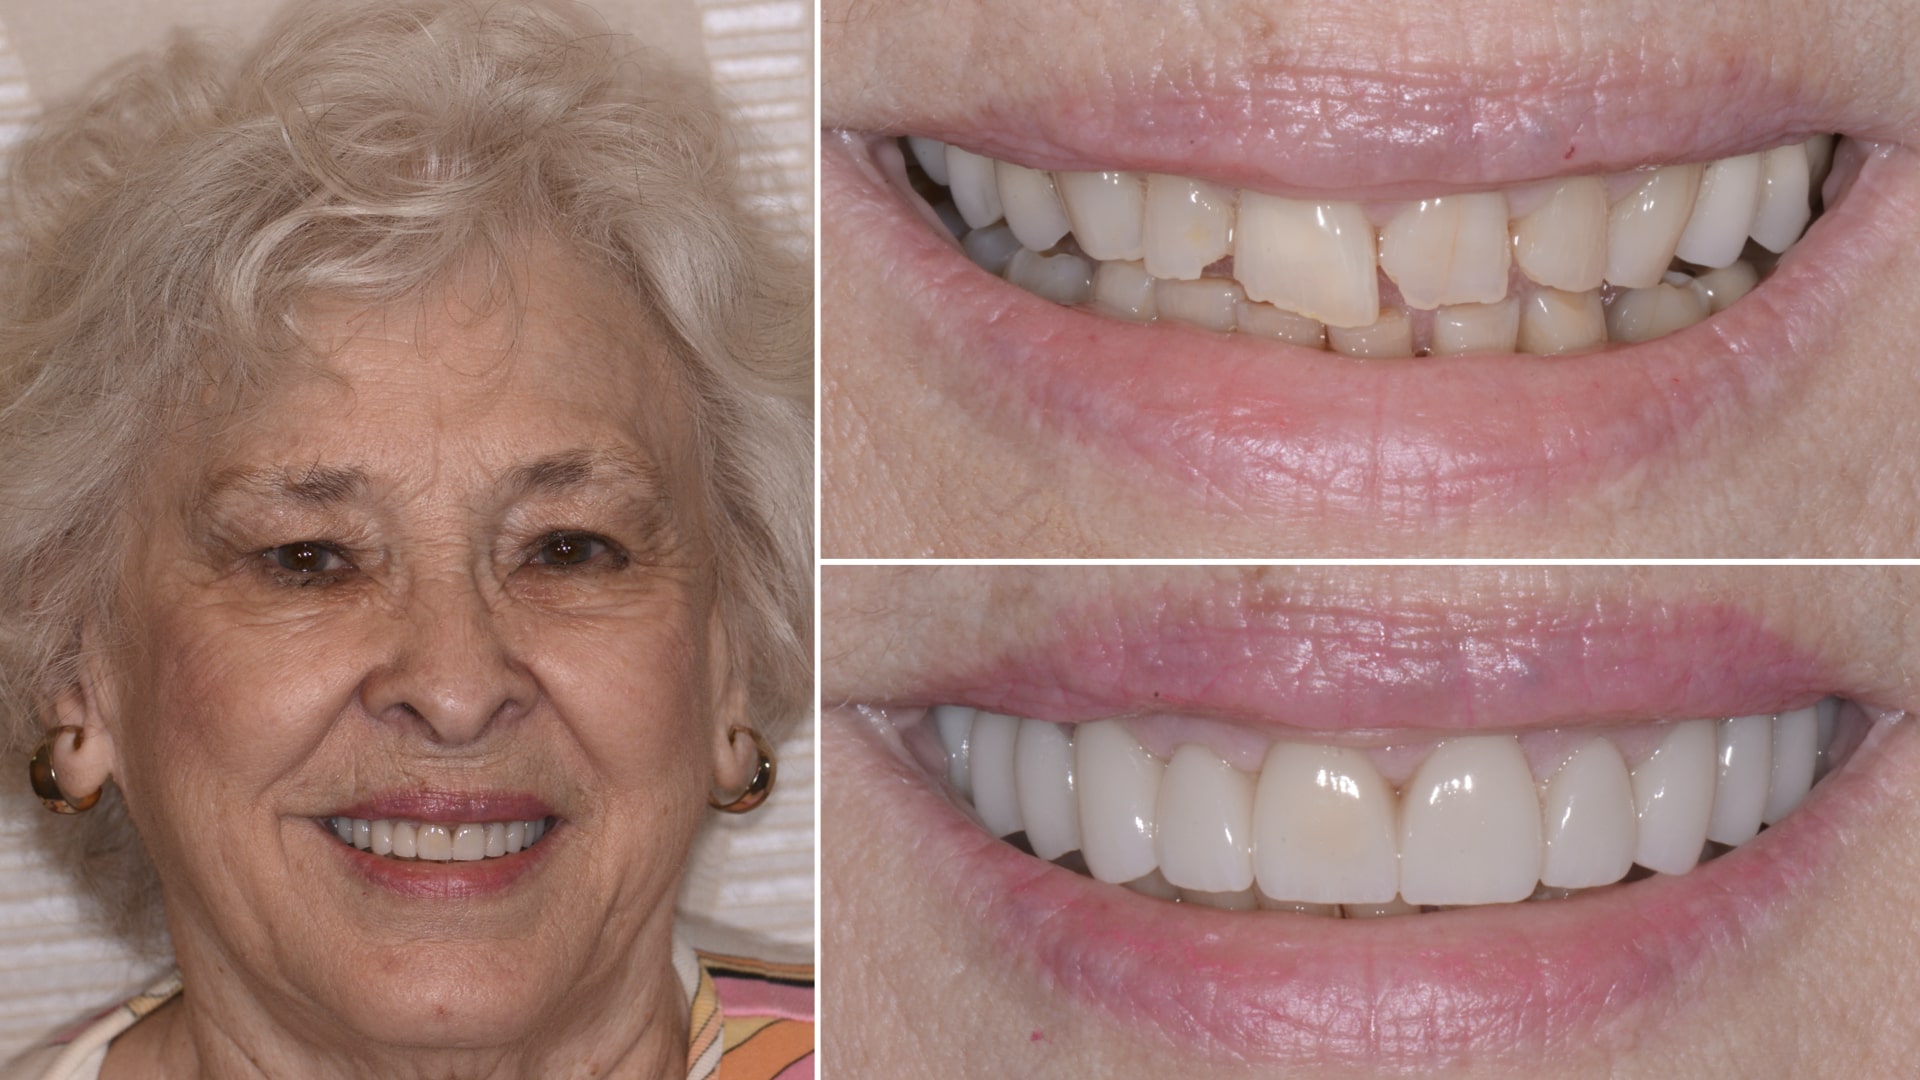 Older woman's smile before and after repairing damaged teeth